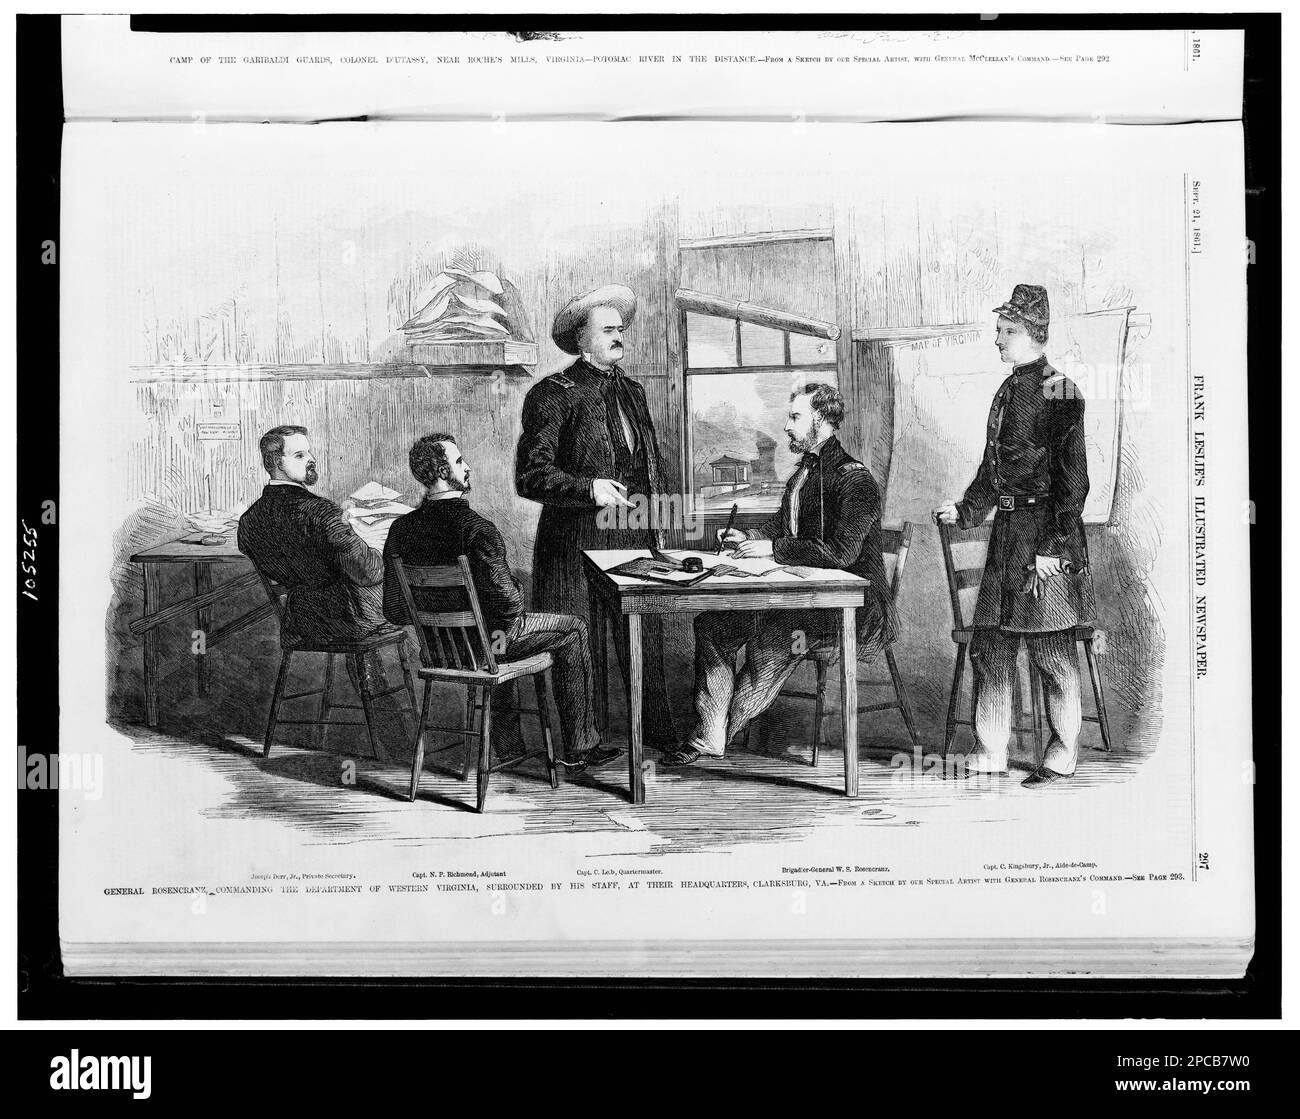 General Rosencranz, i.e. Rosecrans commanding the Department of Western Virginia, surrounded by his staff, at their headquarters, Clarksburg, Virginia / from a sketch by our special artist with General Rosencranz's i.e. Rosecrans command. , General Rosencranz, commanding the Department of Western VirginiaGeneral Rosecrans commanding the Department of Western Virginia. Wood engraving from a sketch by Henri Lovie (1829-1975), field artist for Frank Leslie's Illustrated Newspaper during the Civil War, Illus. in: Frank Leslie's illustrated newspaper, 1861 Sept. 21, p. 297. Rosecrans, William S, (W Stock Photo